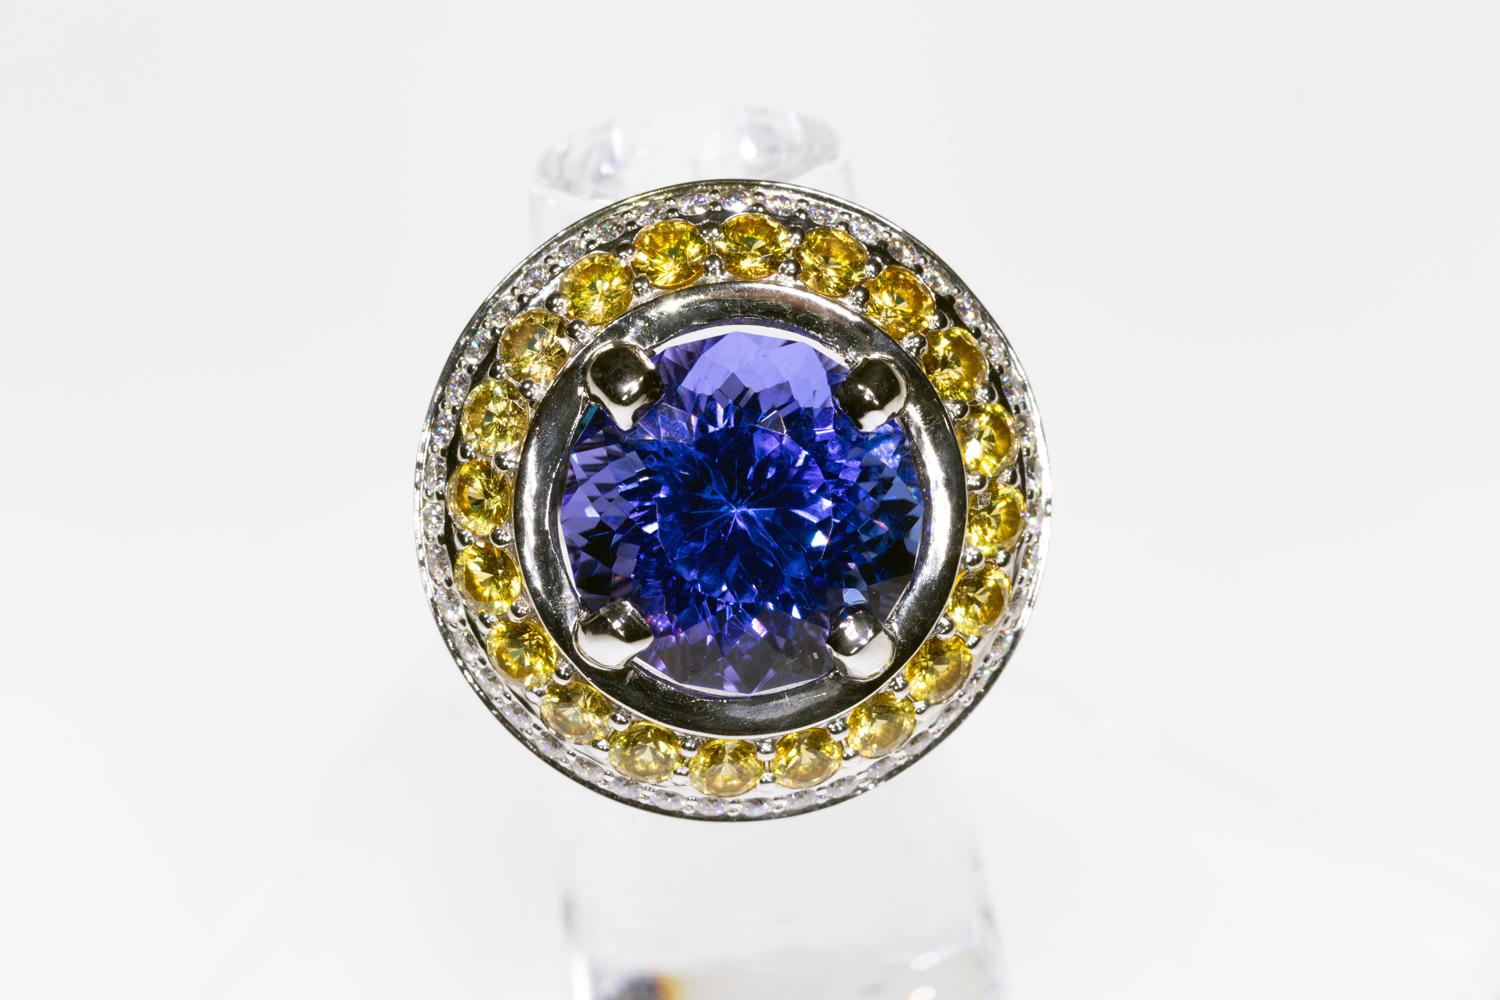 This is a one of kind beautifully crafted cocktail ring made in the studios of T Makowski Company. The ring is made from 18K White Gold and features a 10 carat Tanzanite center stone accented by natural yellow sapphires and diamonds. This is a jaw